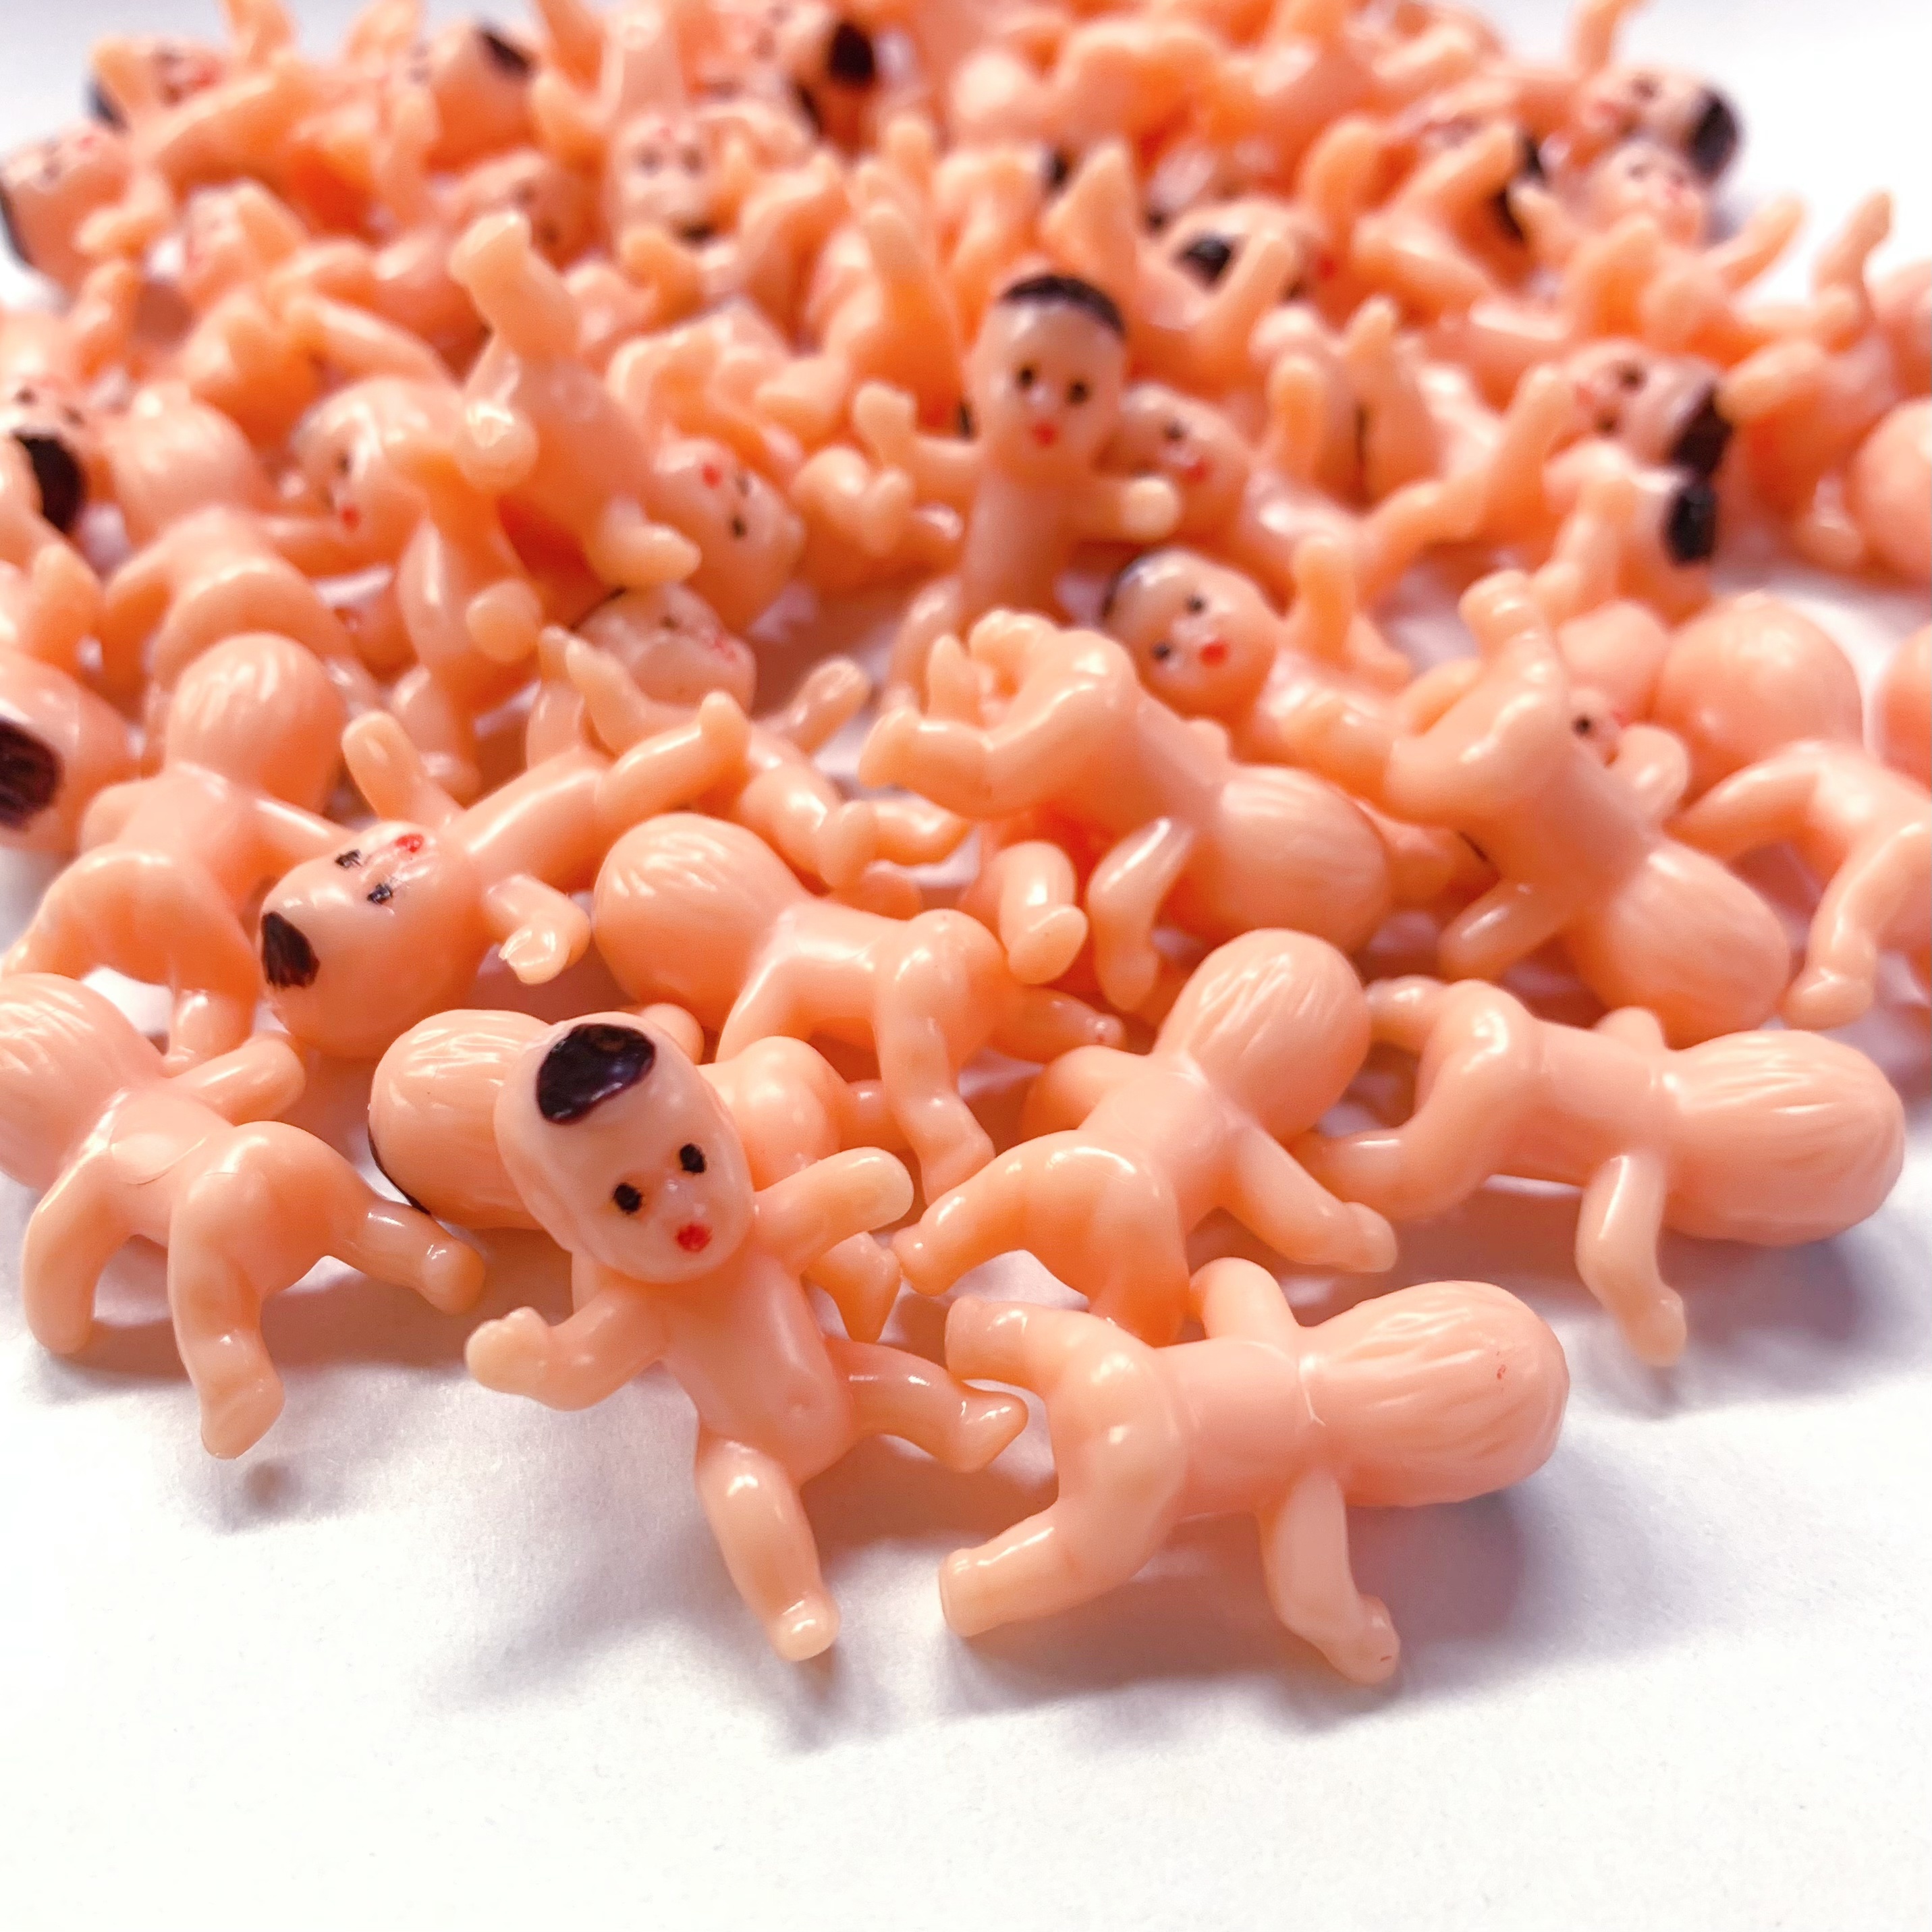 Gawertoy 240 Pcs Mini Plastic Babies Dolls, 1 inch Small King Cake Baby Figures Plastic Tiny Baby Figurines for Baby Shower Party Favors Ice Cube